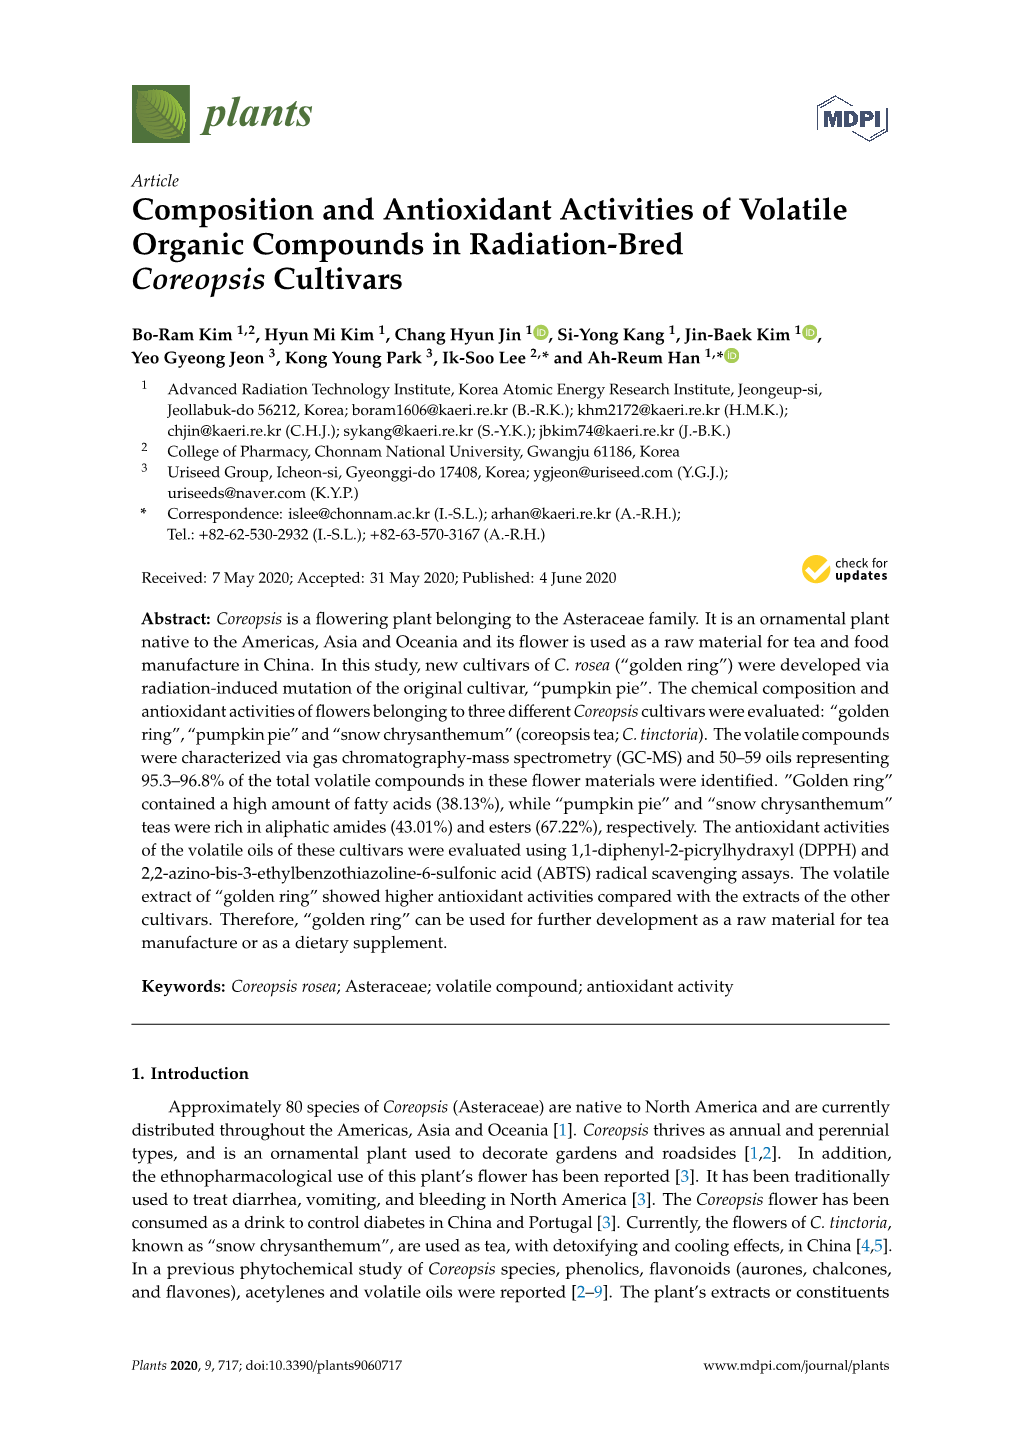 Composition and Antioxidant Activities of Volatile Organic Compounds in Radiation-Bred Coreopsis Cultivars